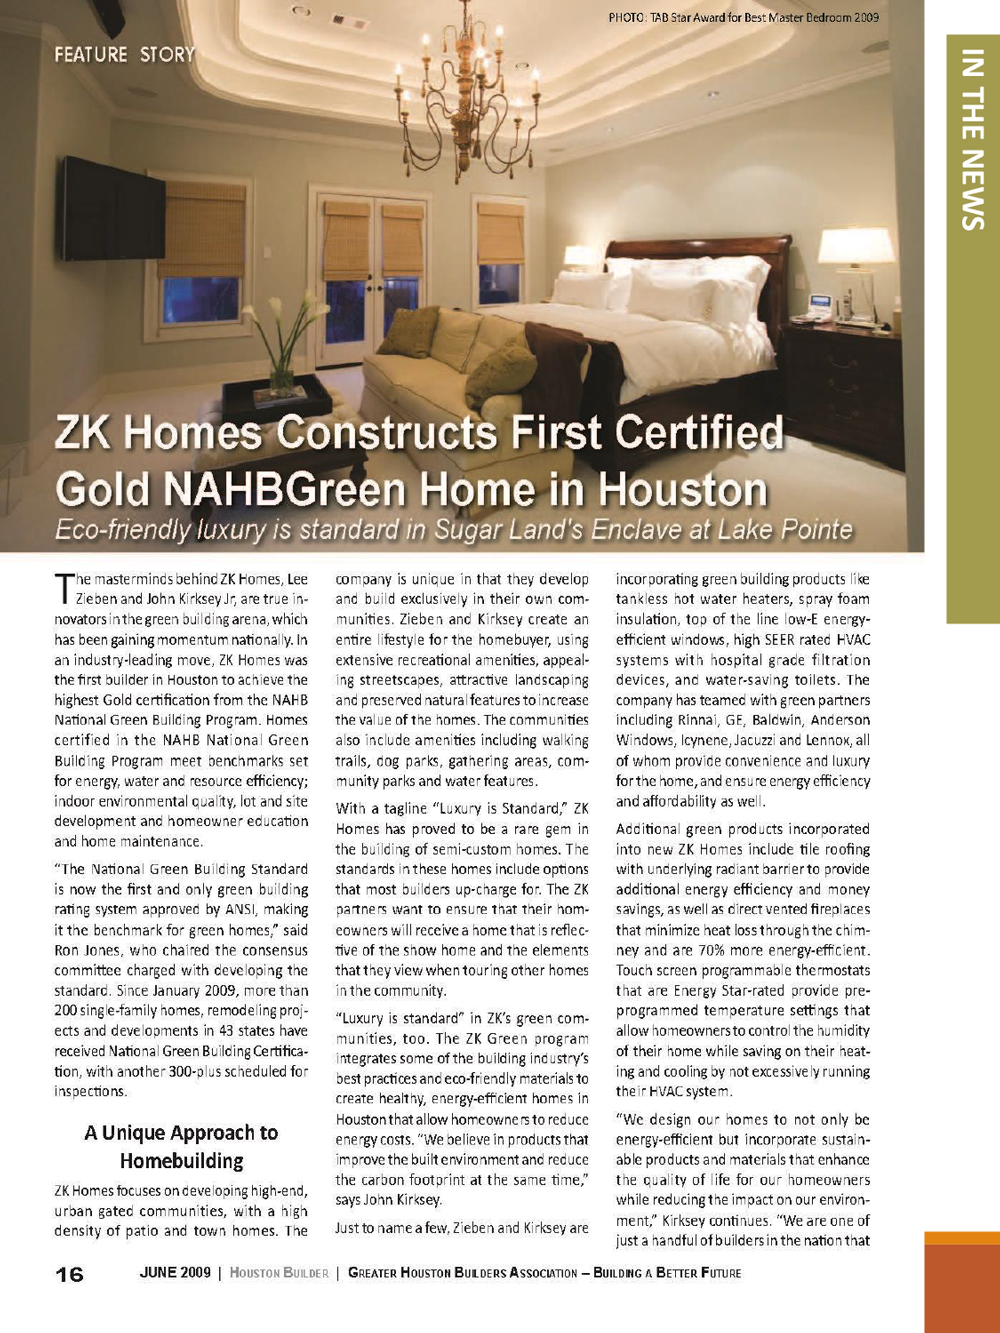 ZK-Homes-Constructs-First-Certified-Gold-NAHB-Green-Home-n-Houston